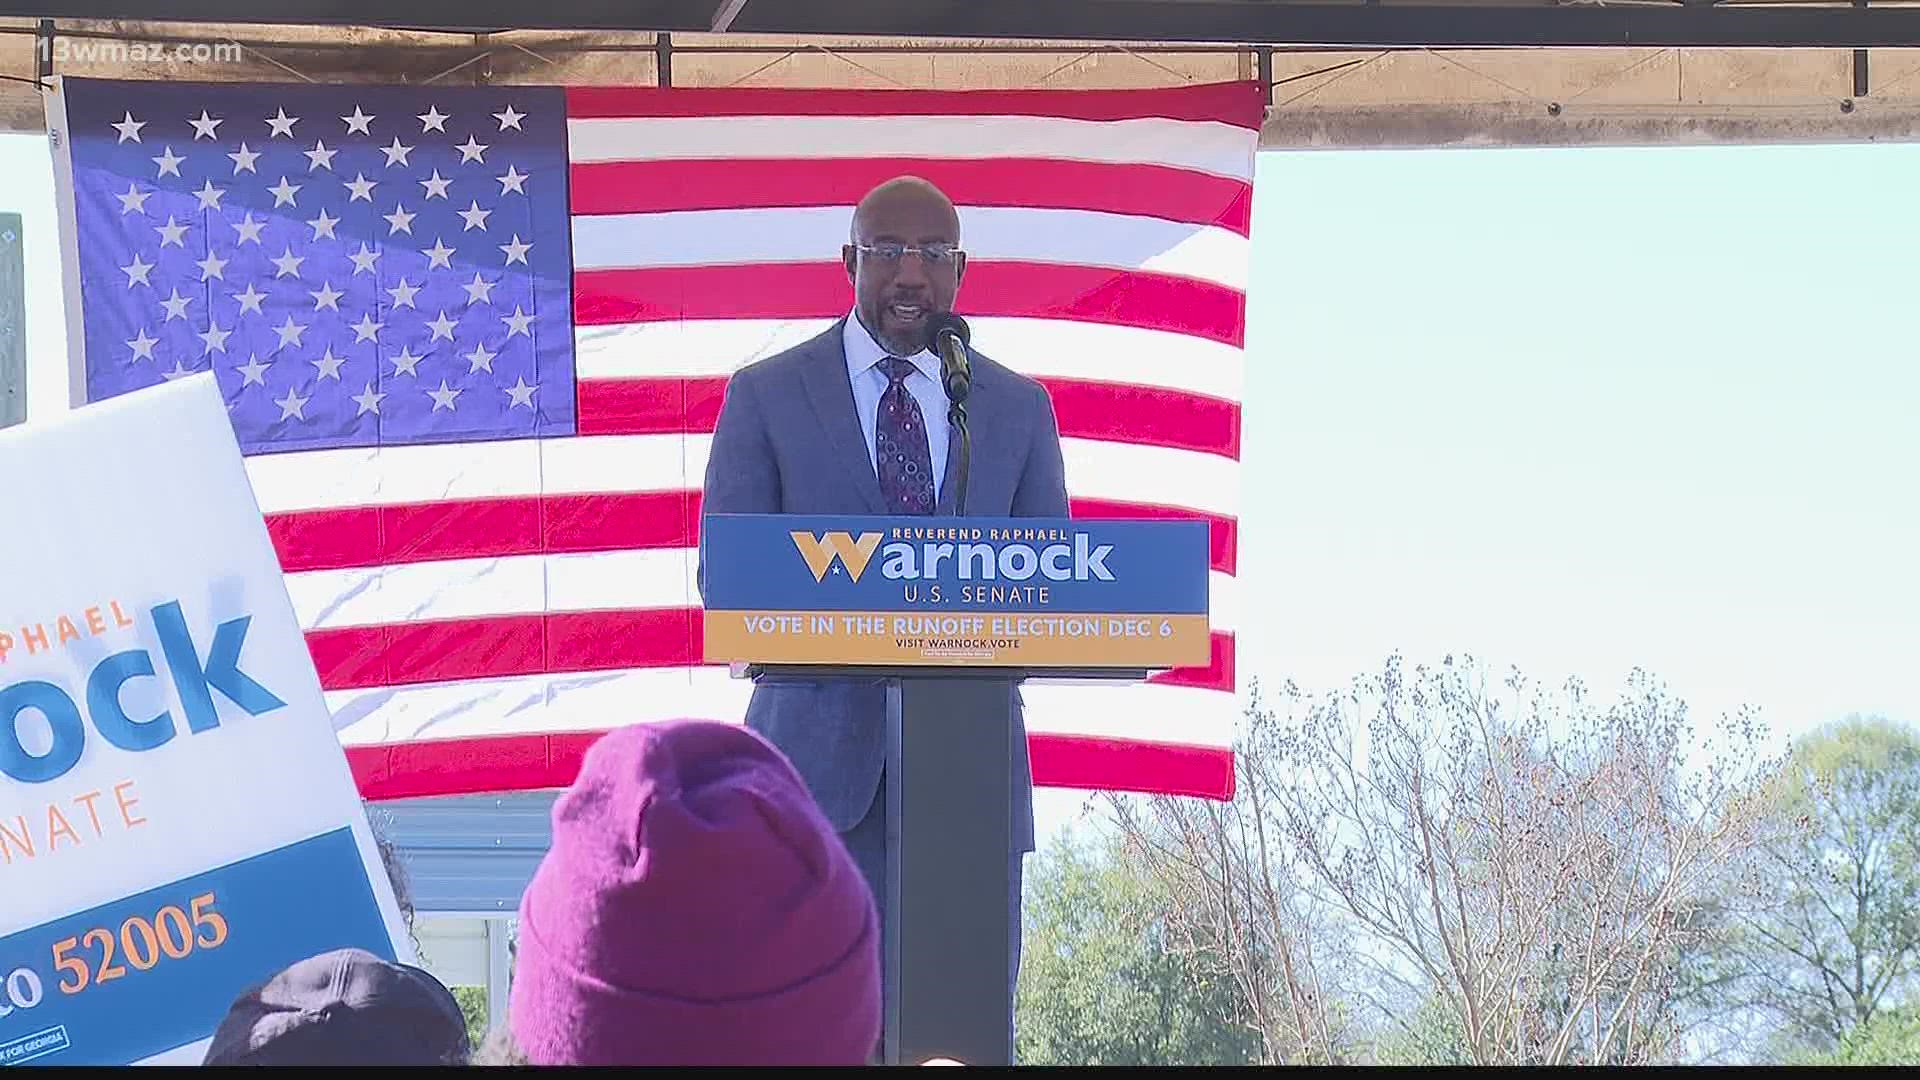 From Fort Valley to Houston County and Macon, Warnock stopped Thursday to talk to Central Georgians about why they should vote for him again.